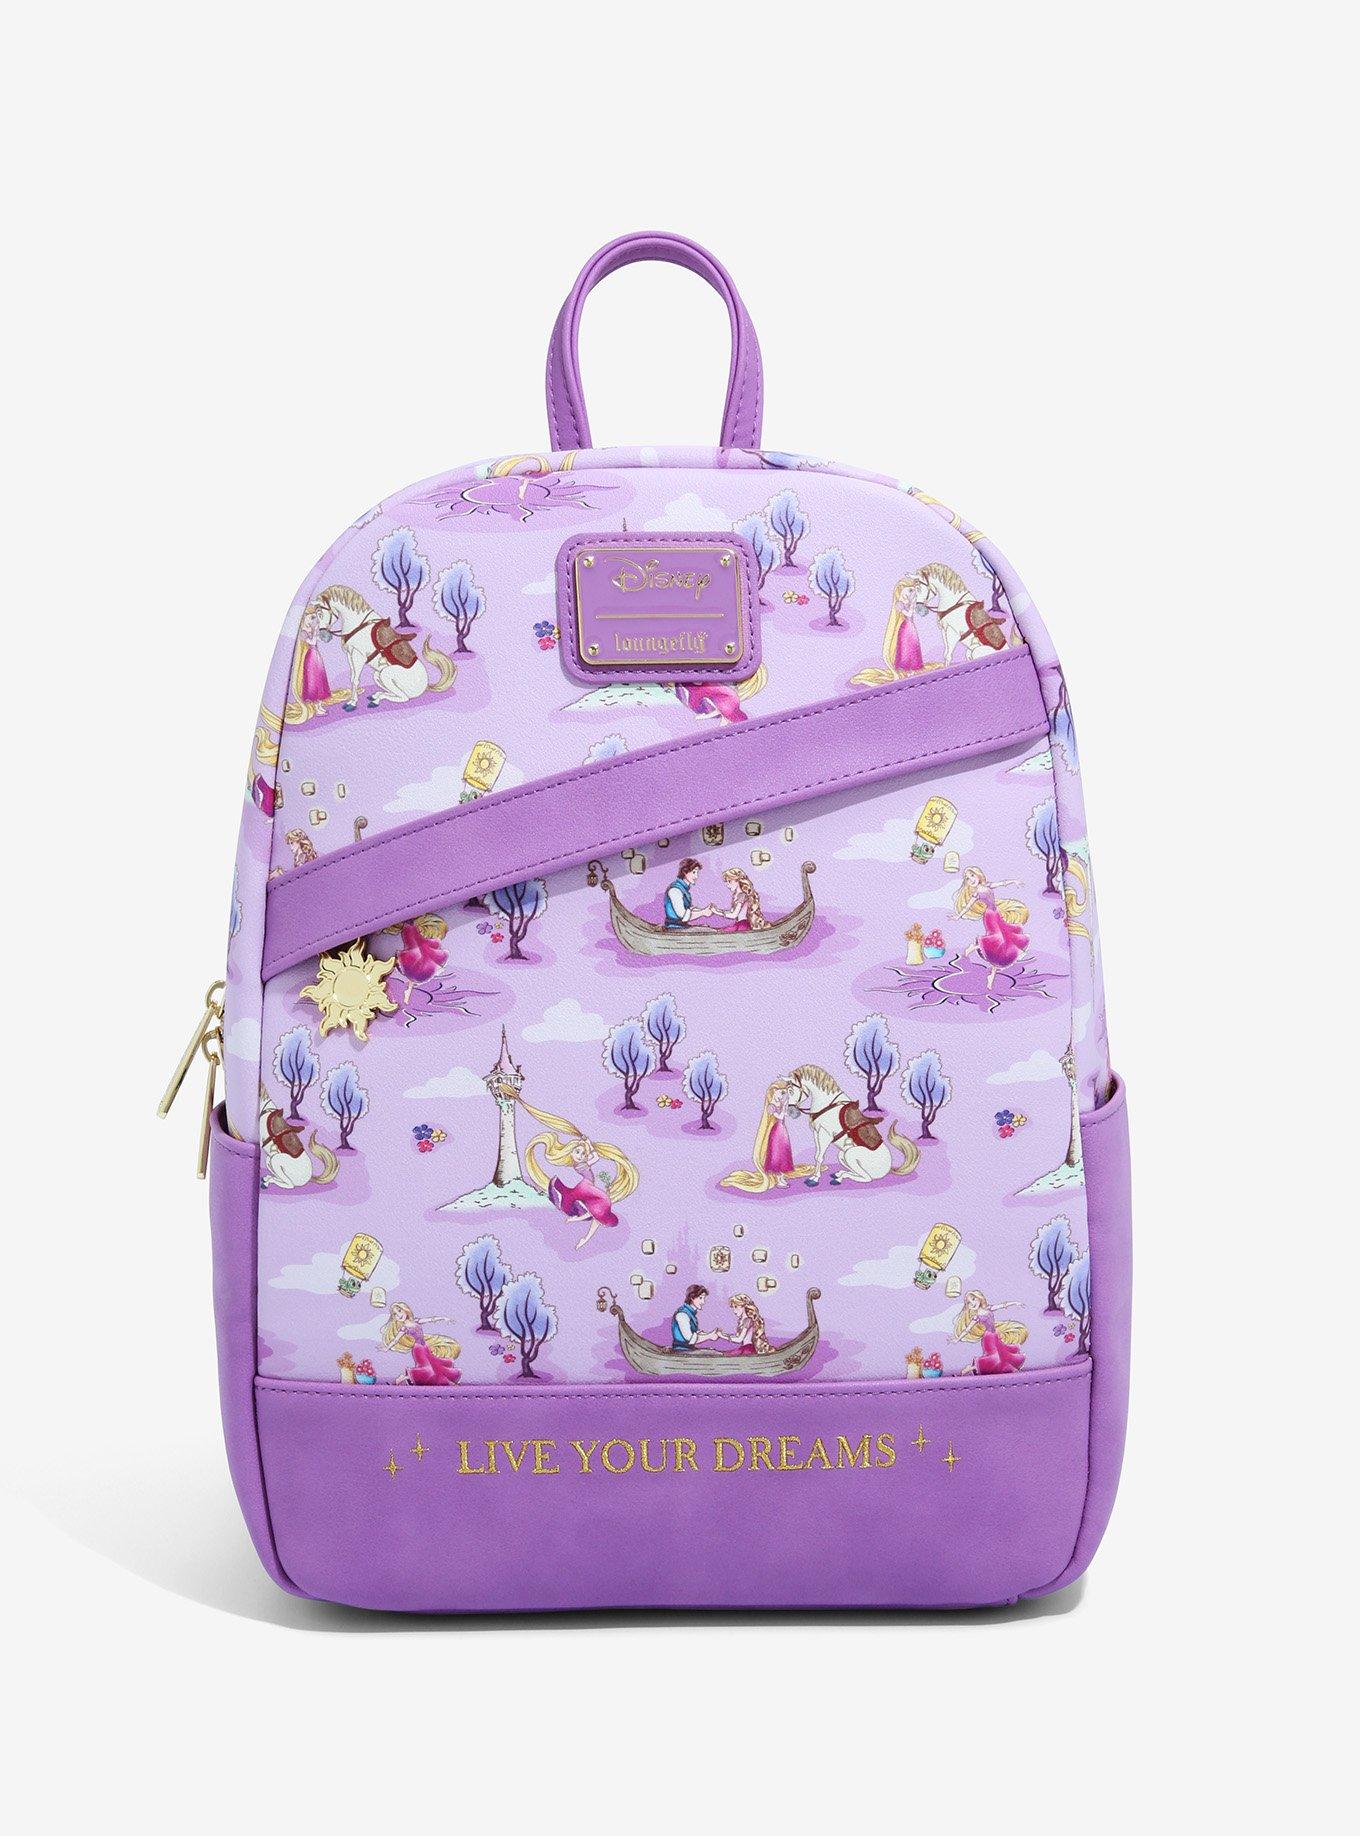 Follow Your Dreams with this Tangled Loungefly Mini Backpack - Disney Dining